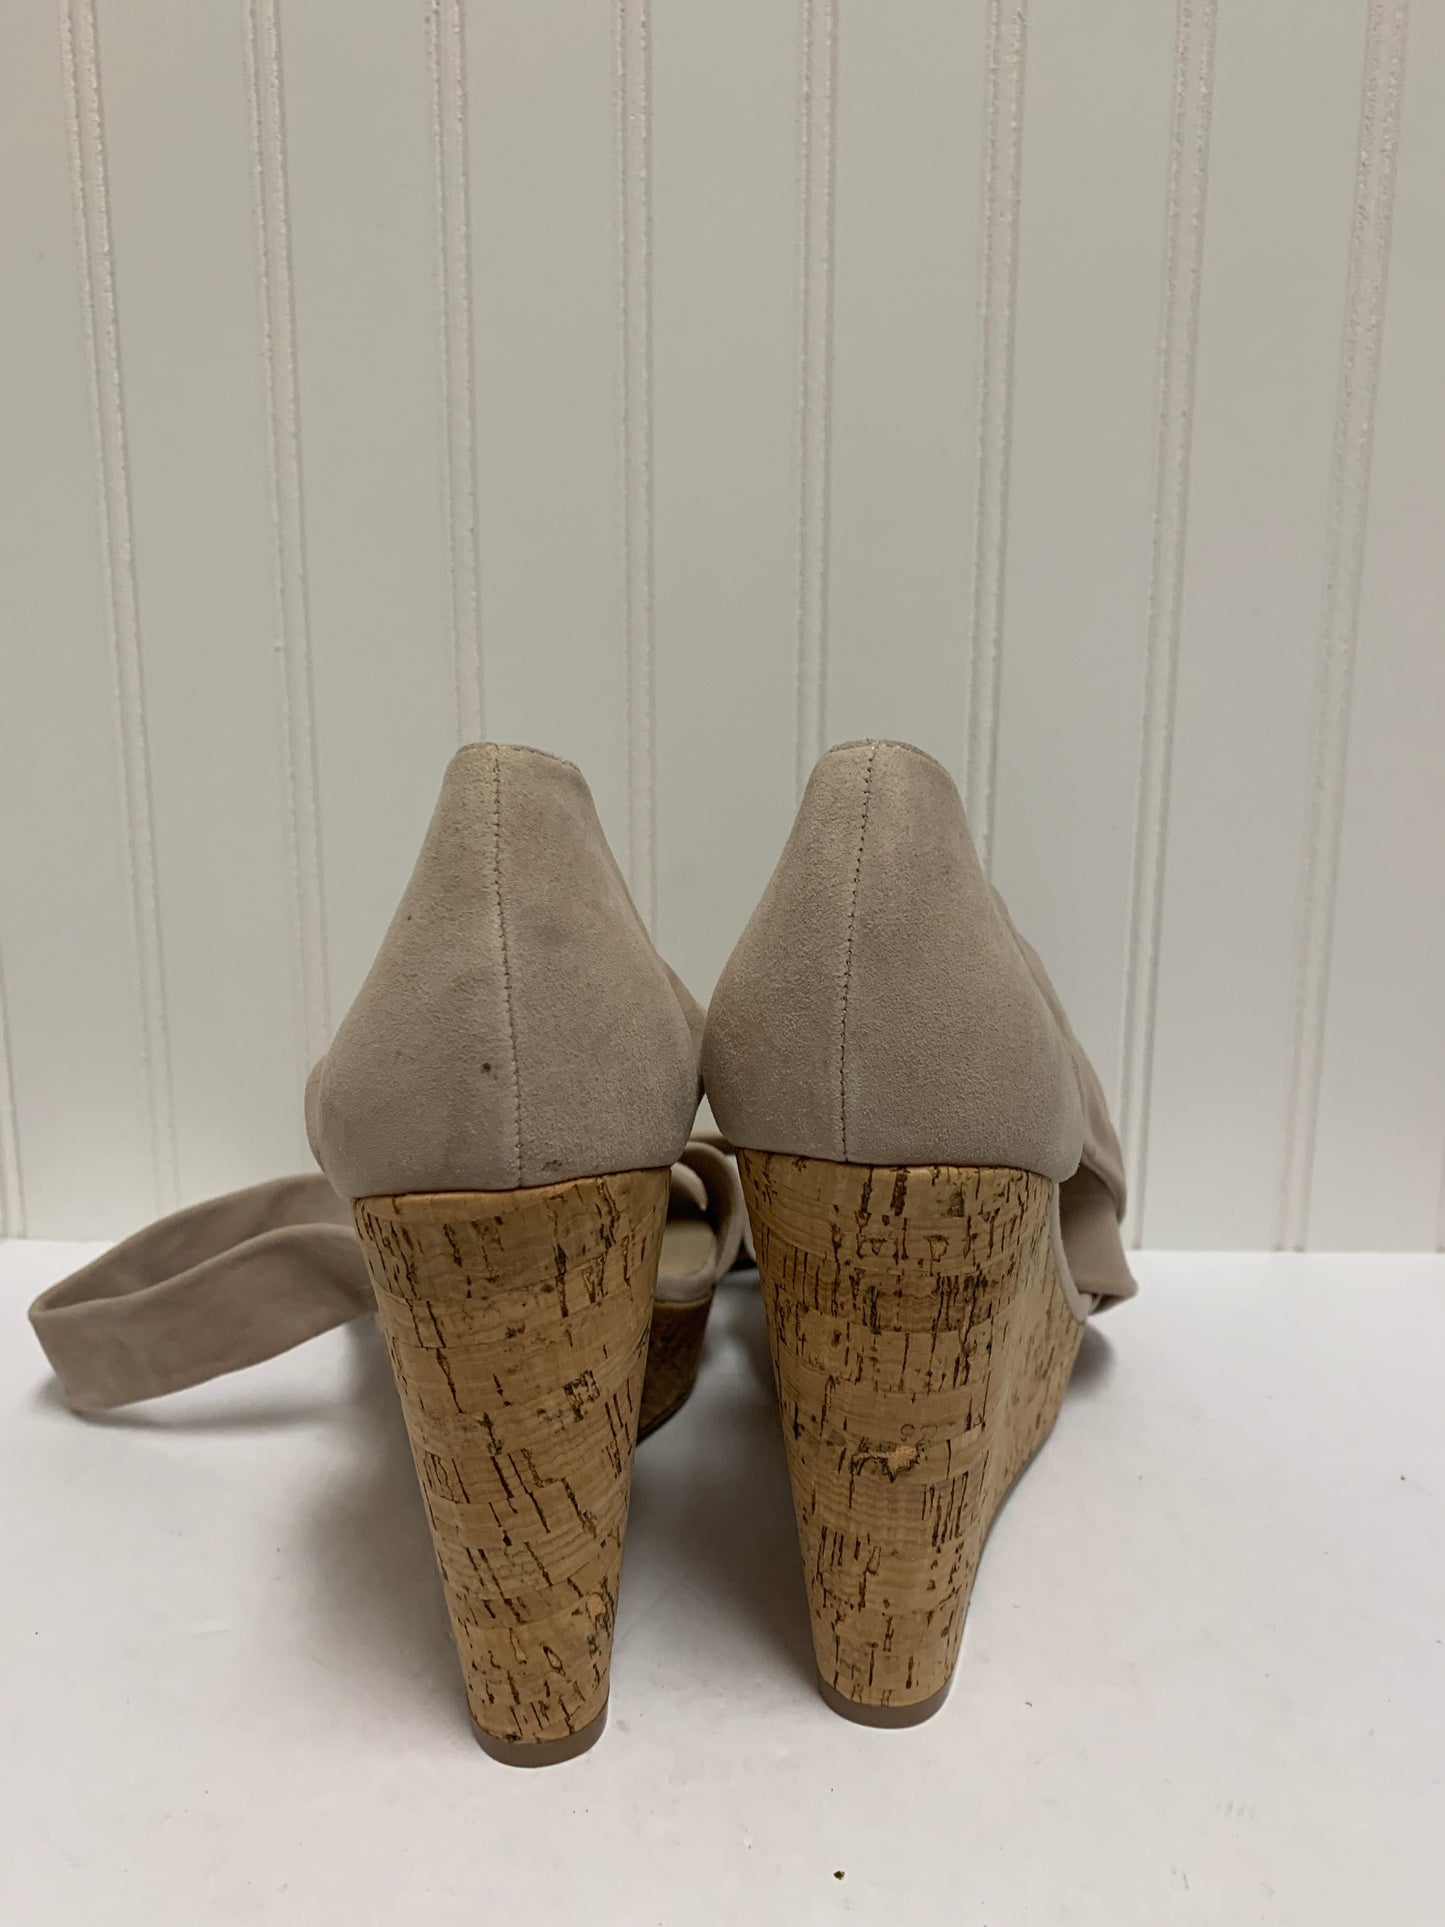 Sandals Heels Wedge By Saks Fifth Avenue  Size: 8